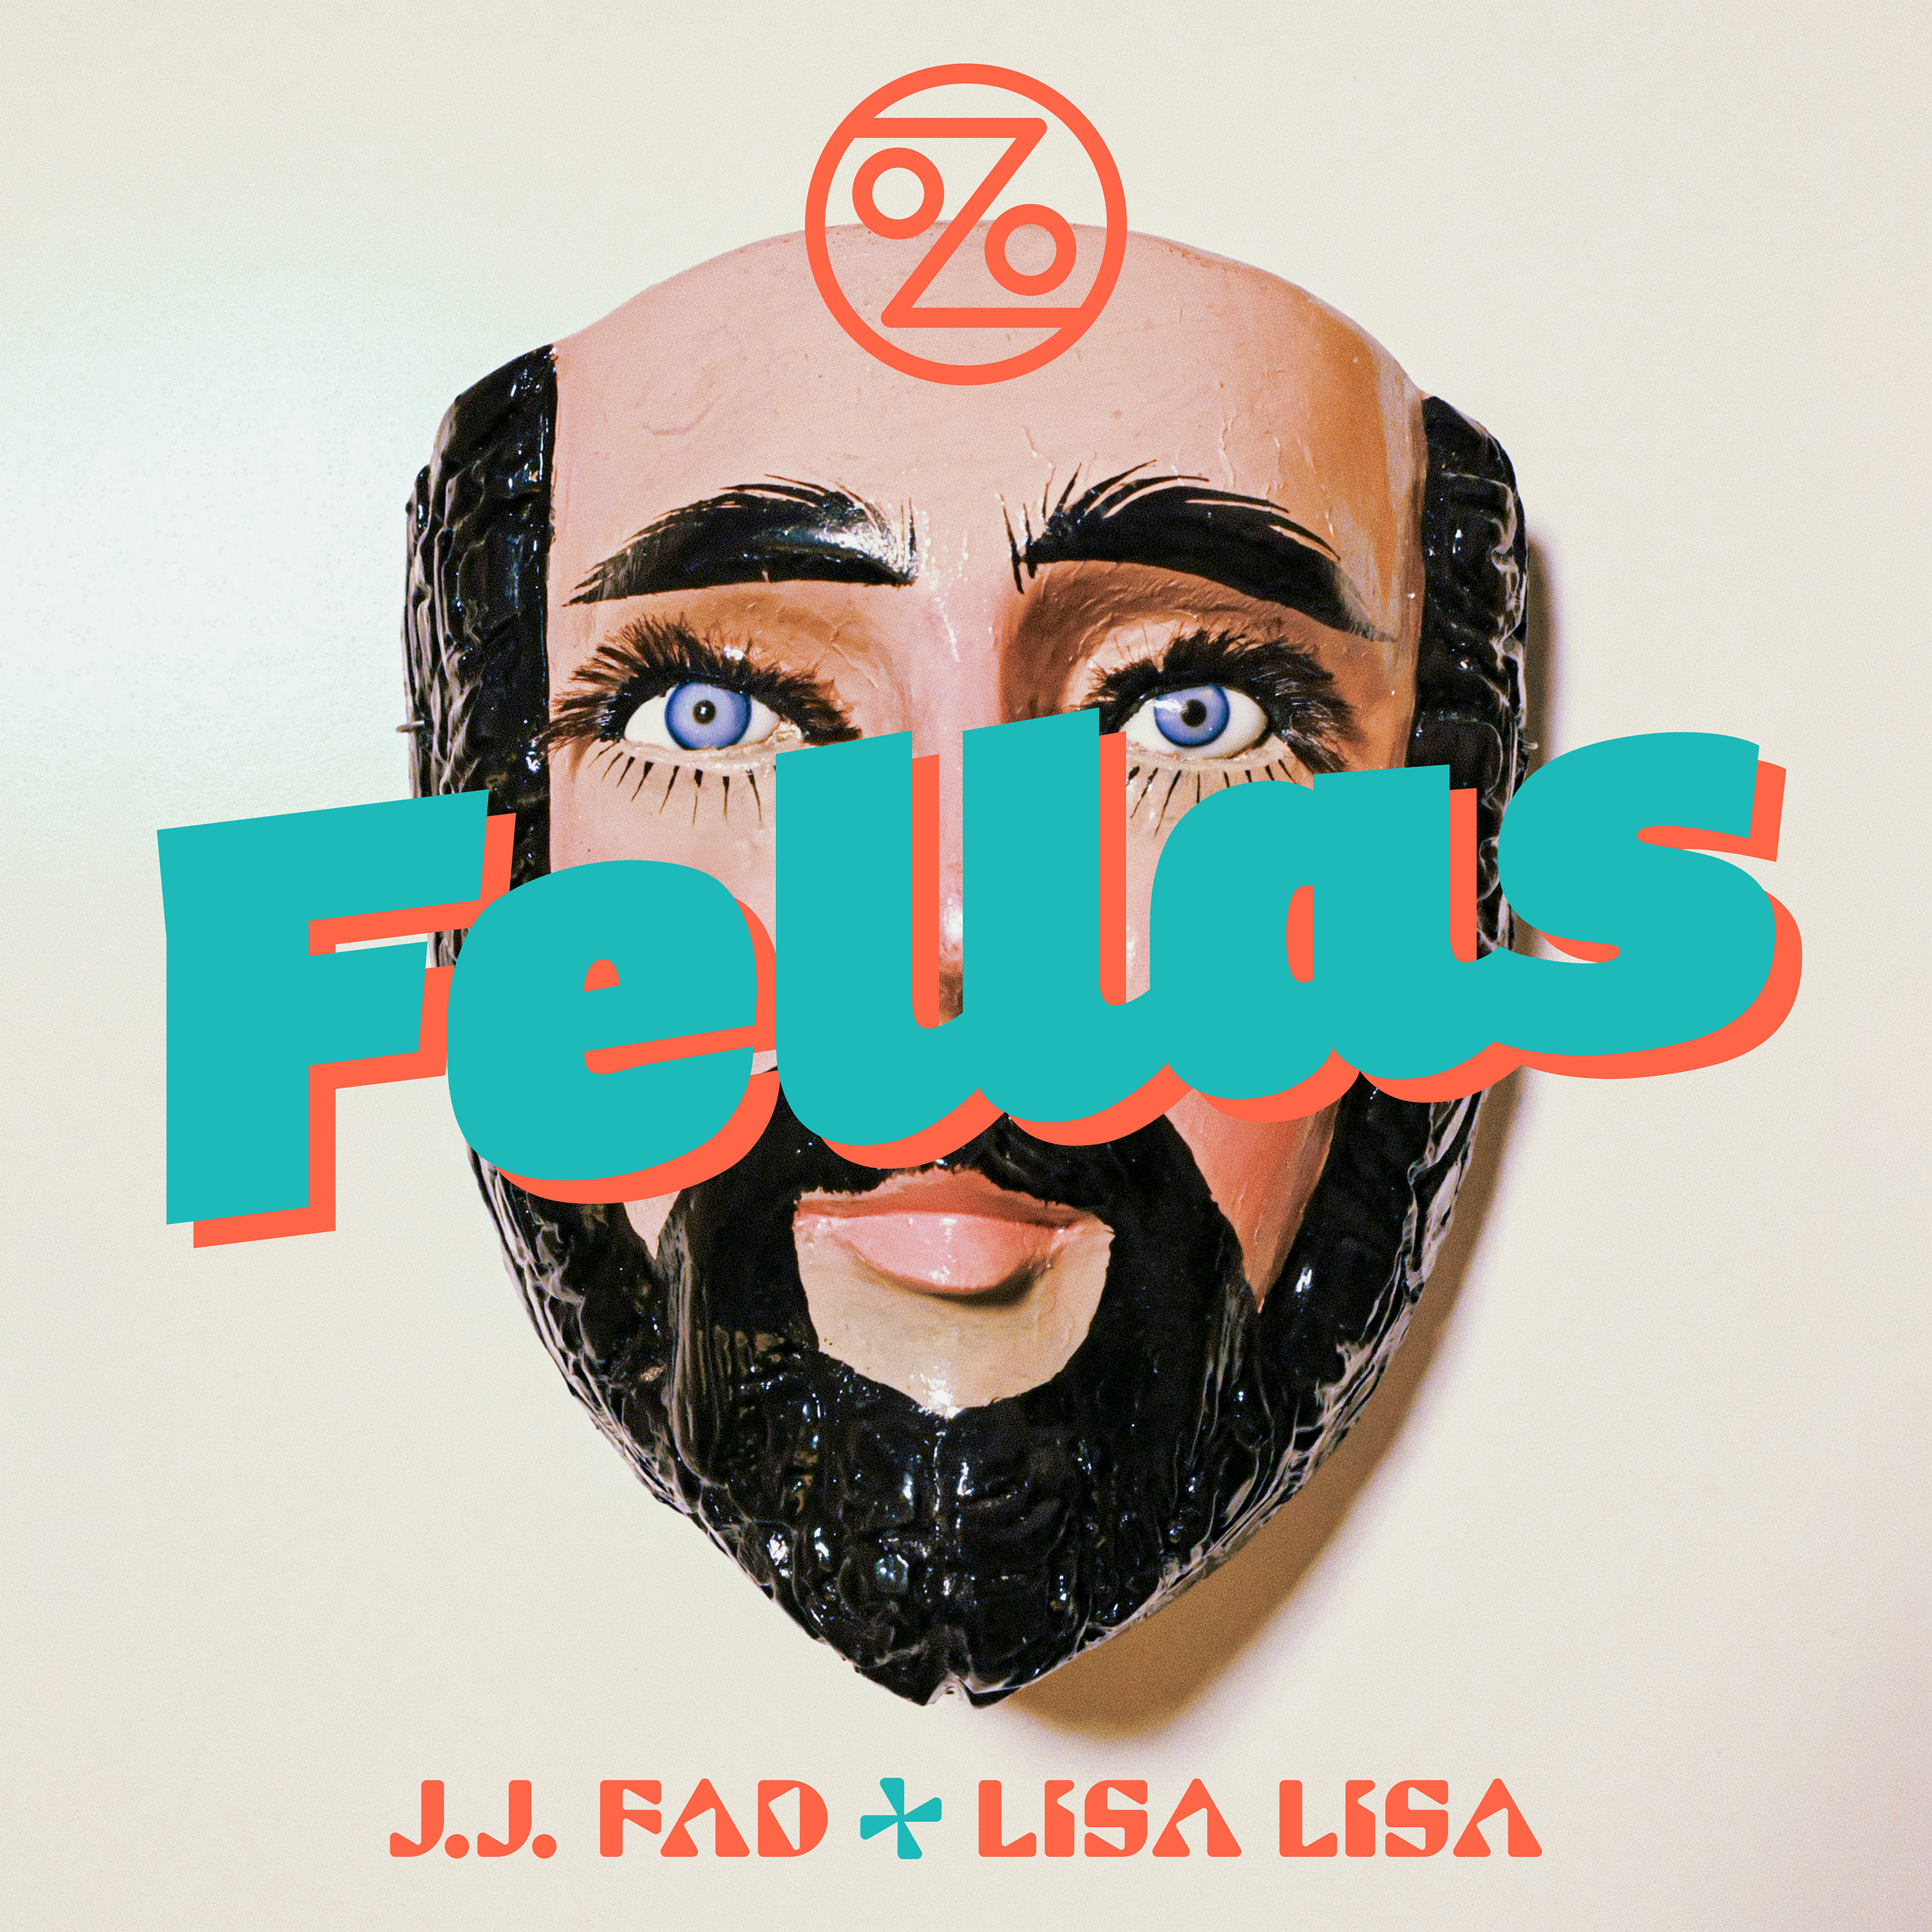 OZOMATLI RELEASE NEW SONG “FELLAS” OUT TODAY